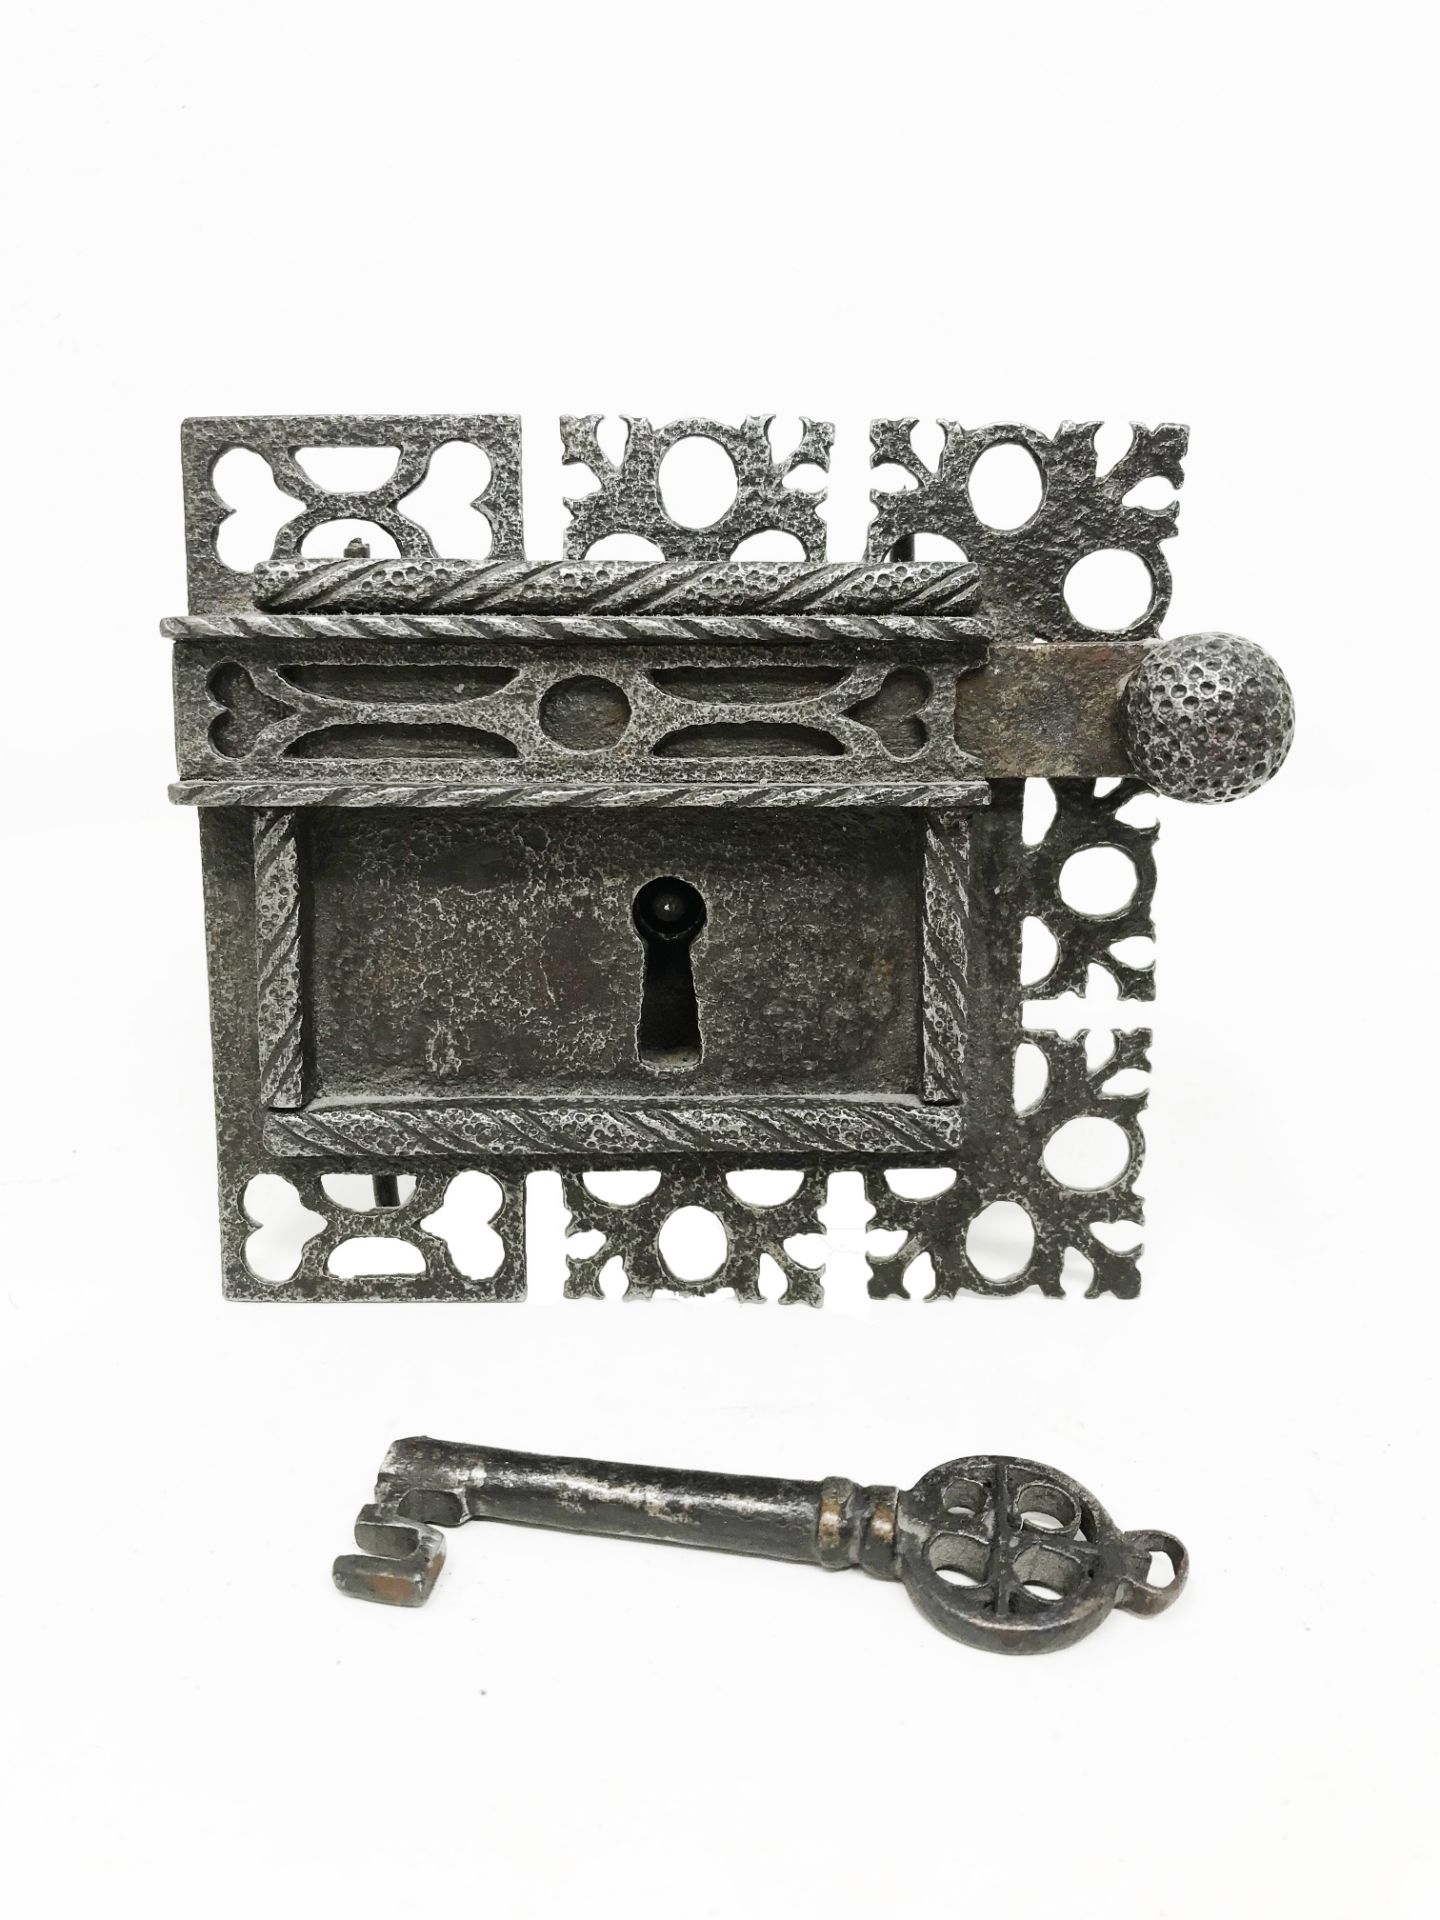 Credenza lock and its so-called Venetian key, lock plate pierced with hearts, twisted frame, bolt - Image 4 of 4